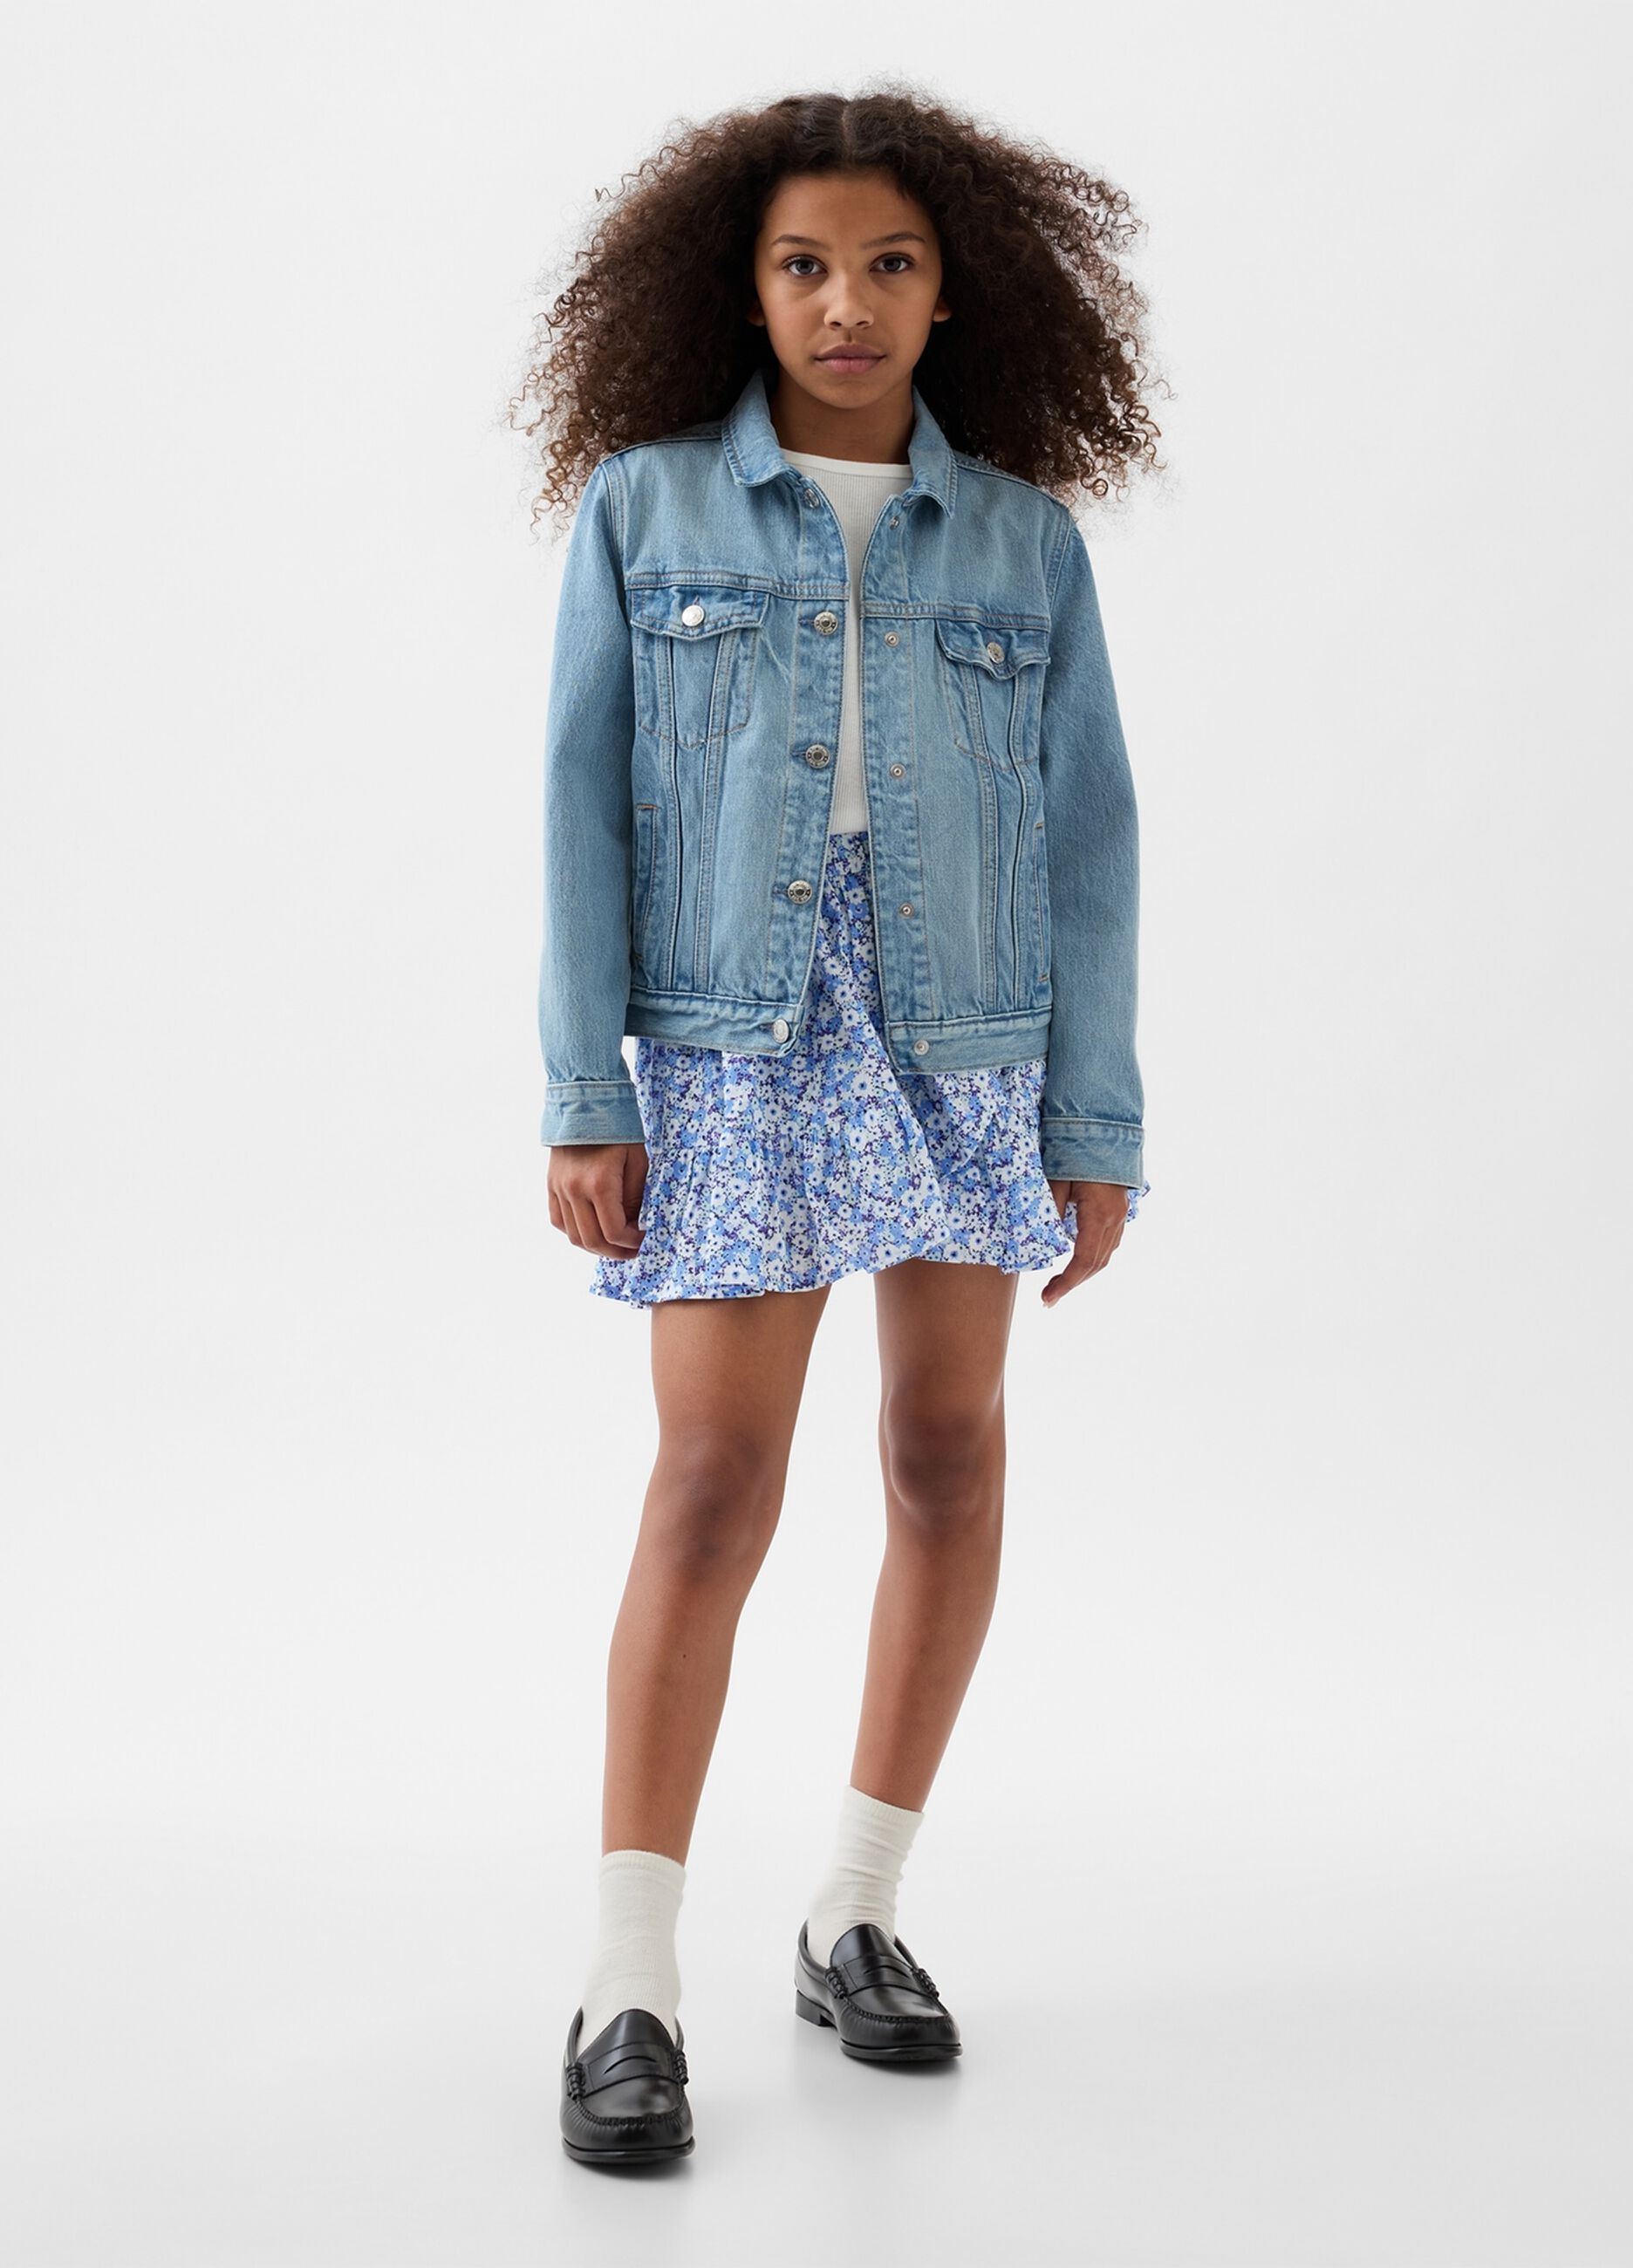 Skort with flounce and floral print